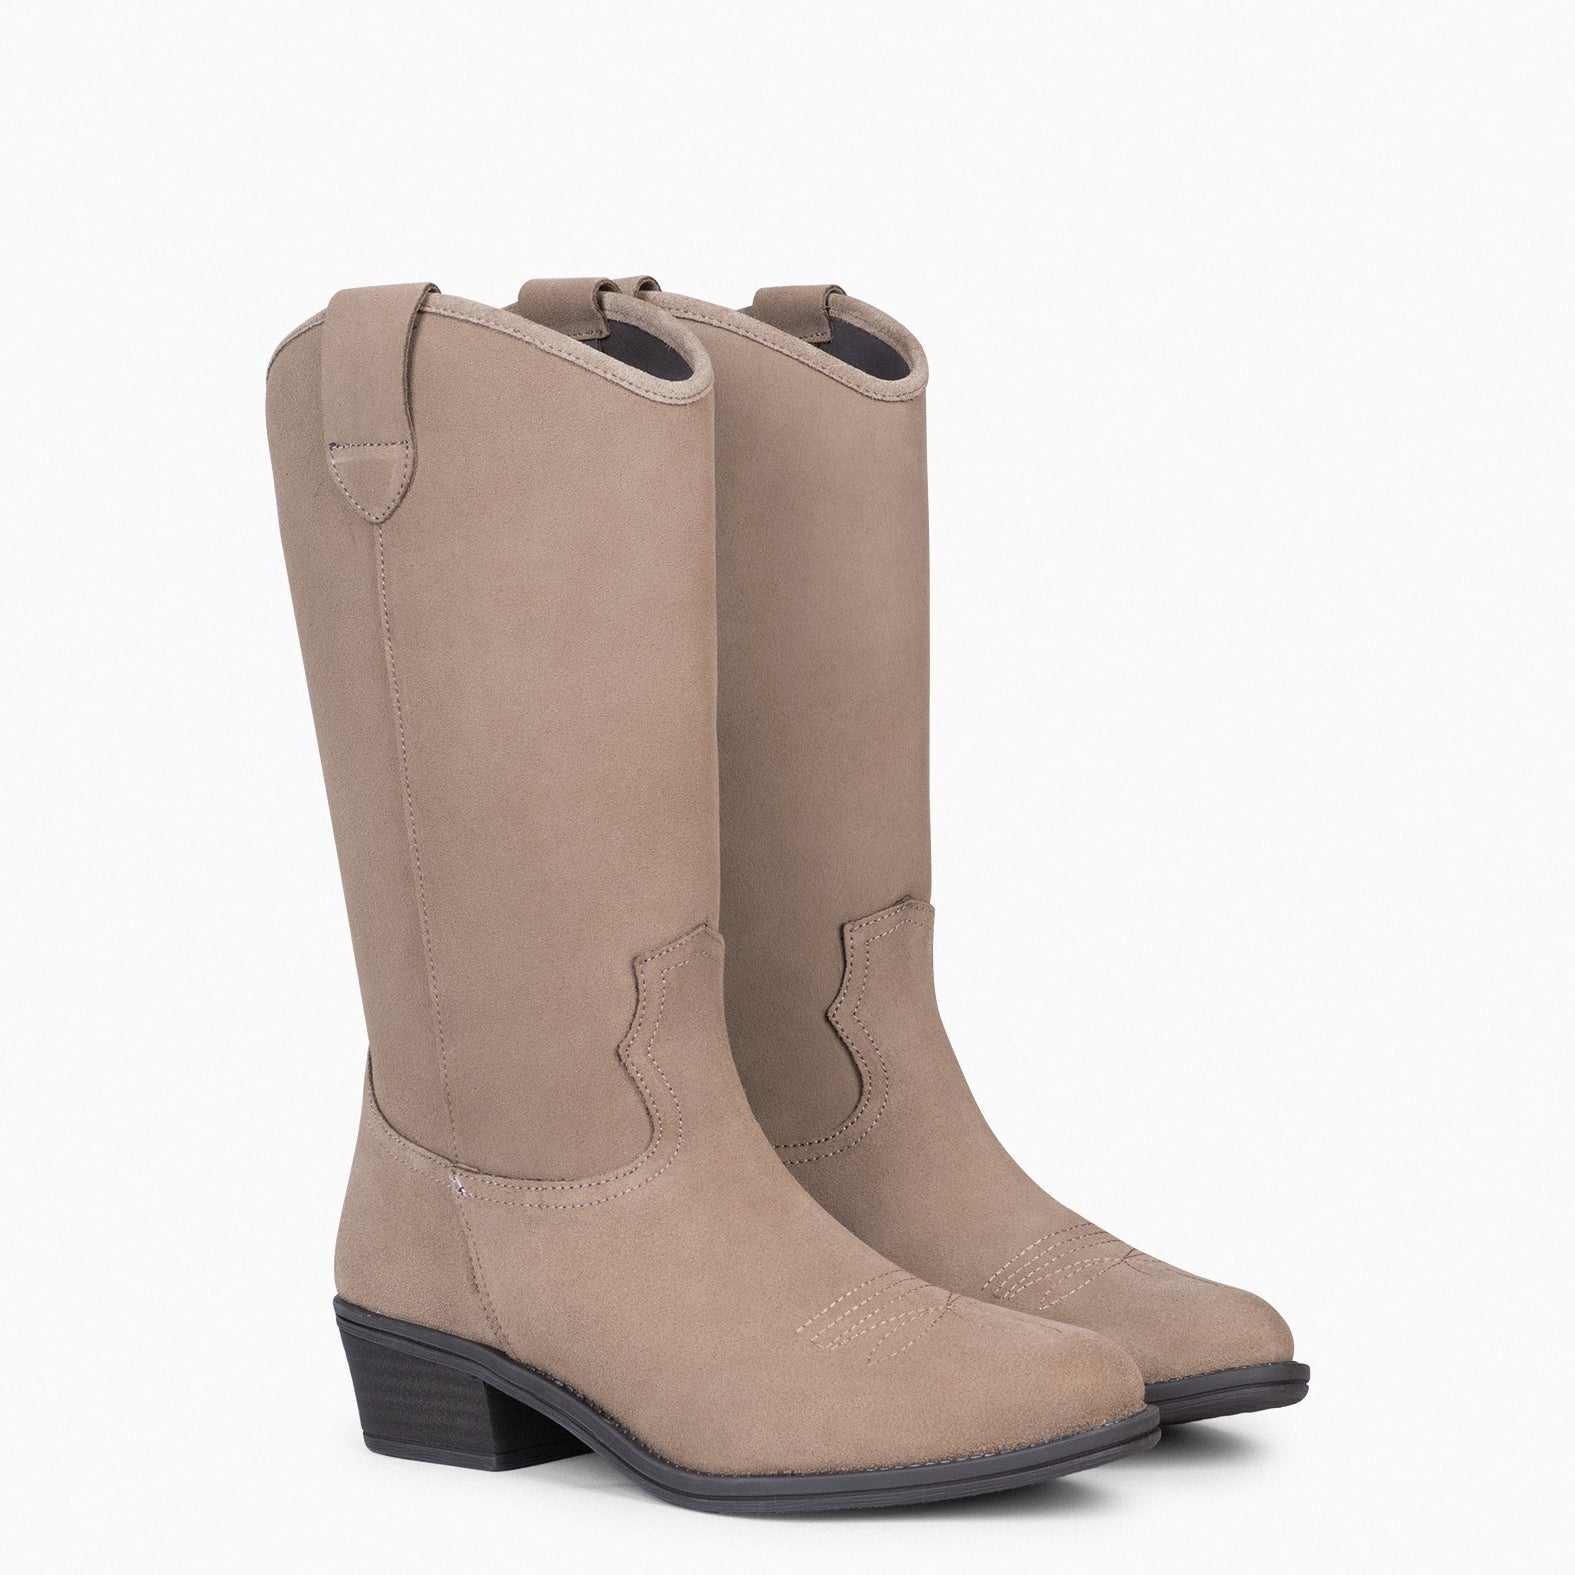 ONTARIO – TAUPE Women Cowboy Boots